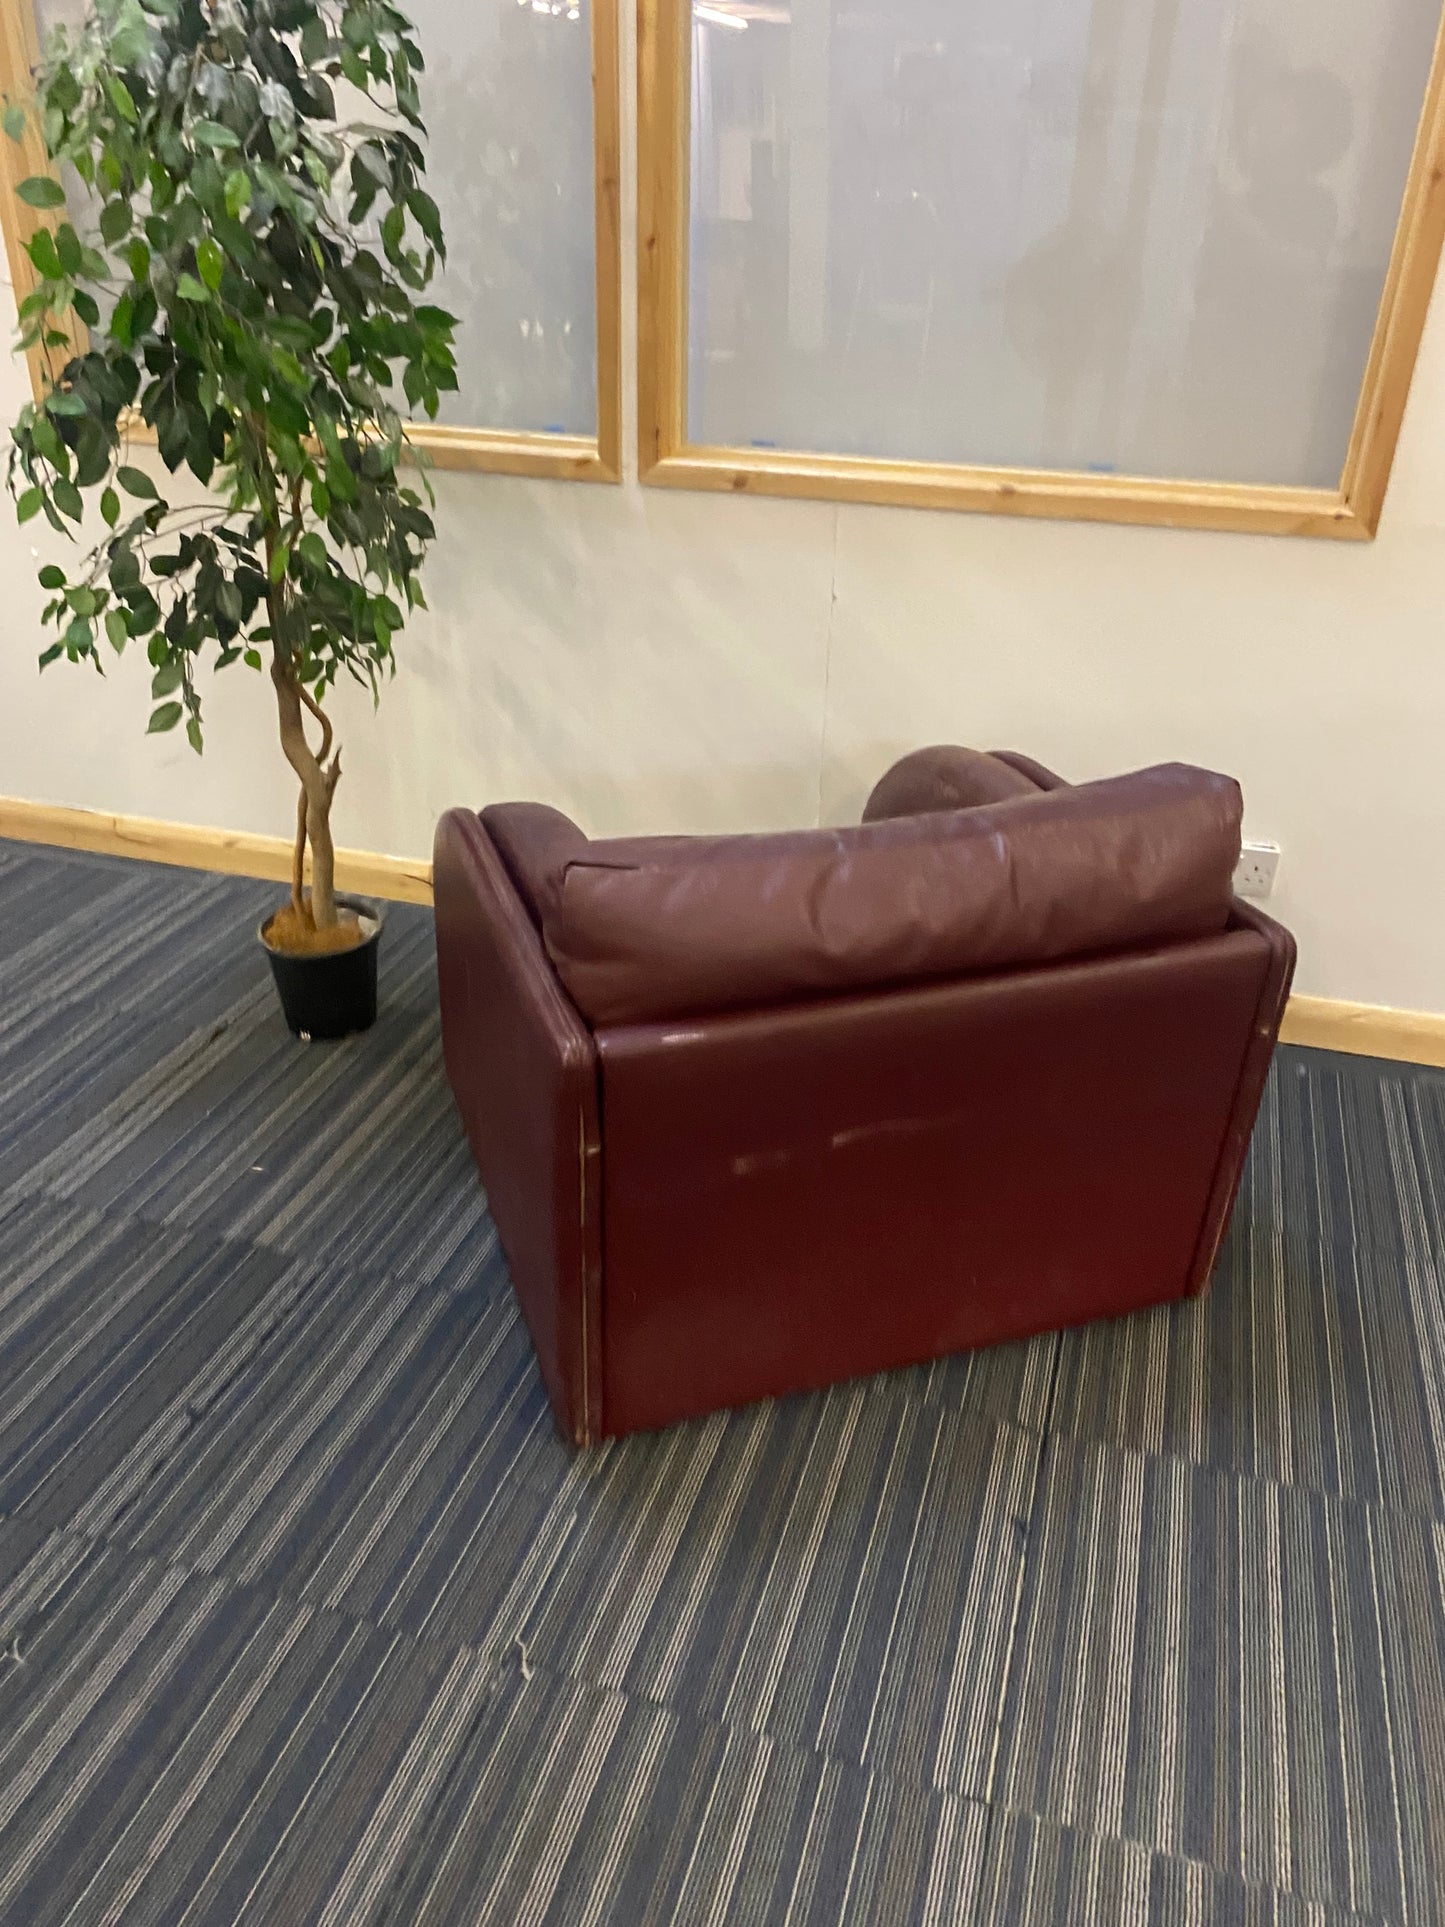 back of leather single armchair sofa with plant